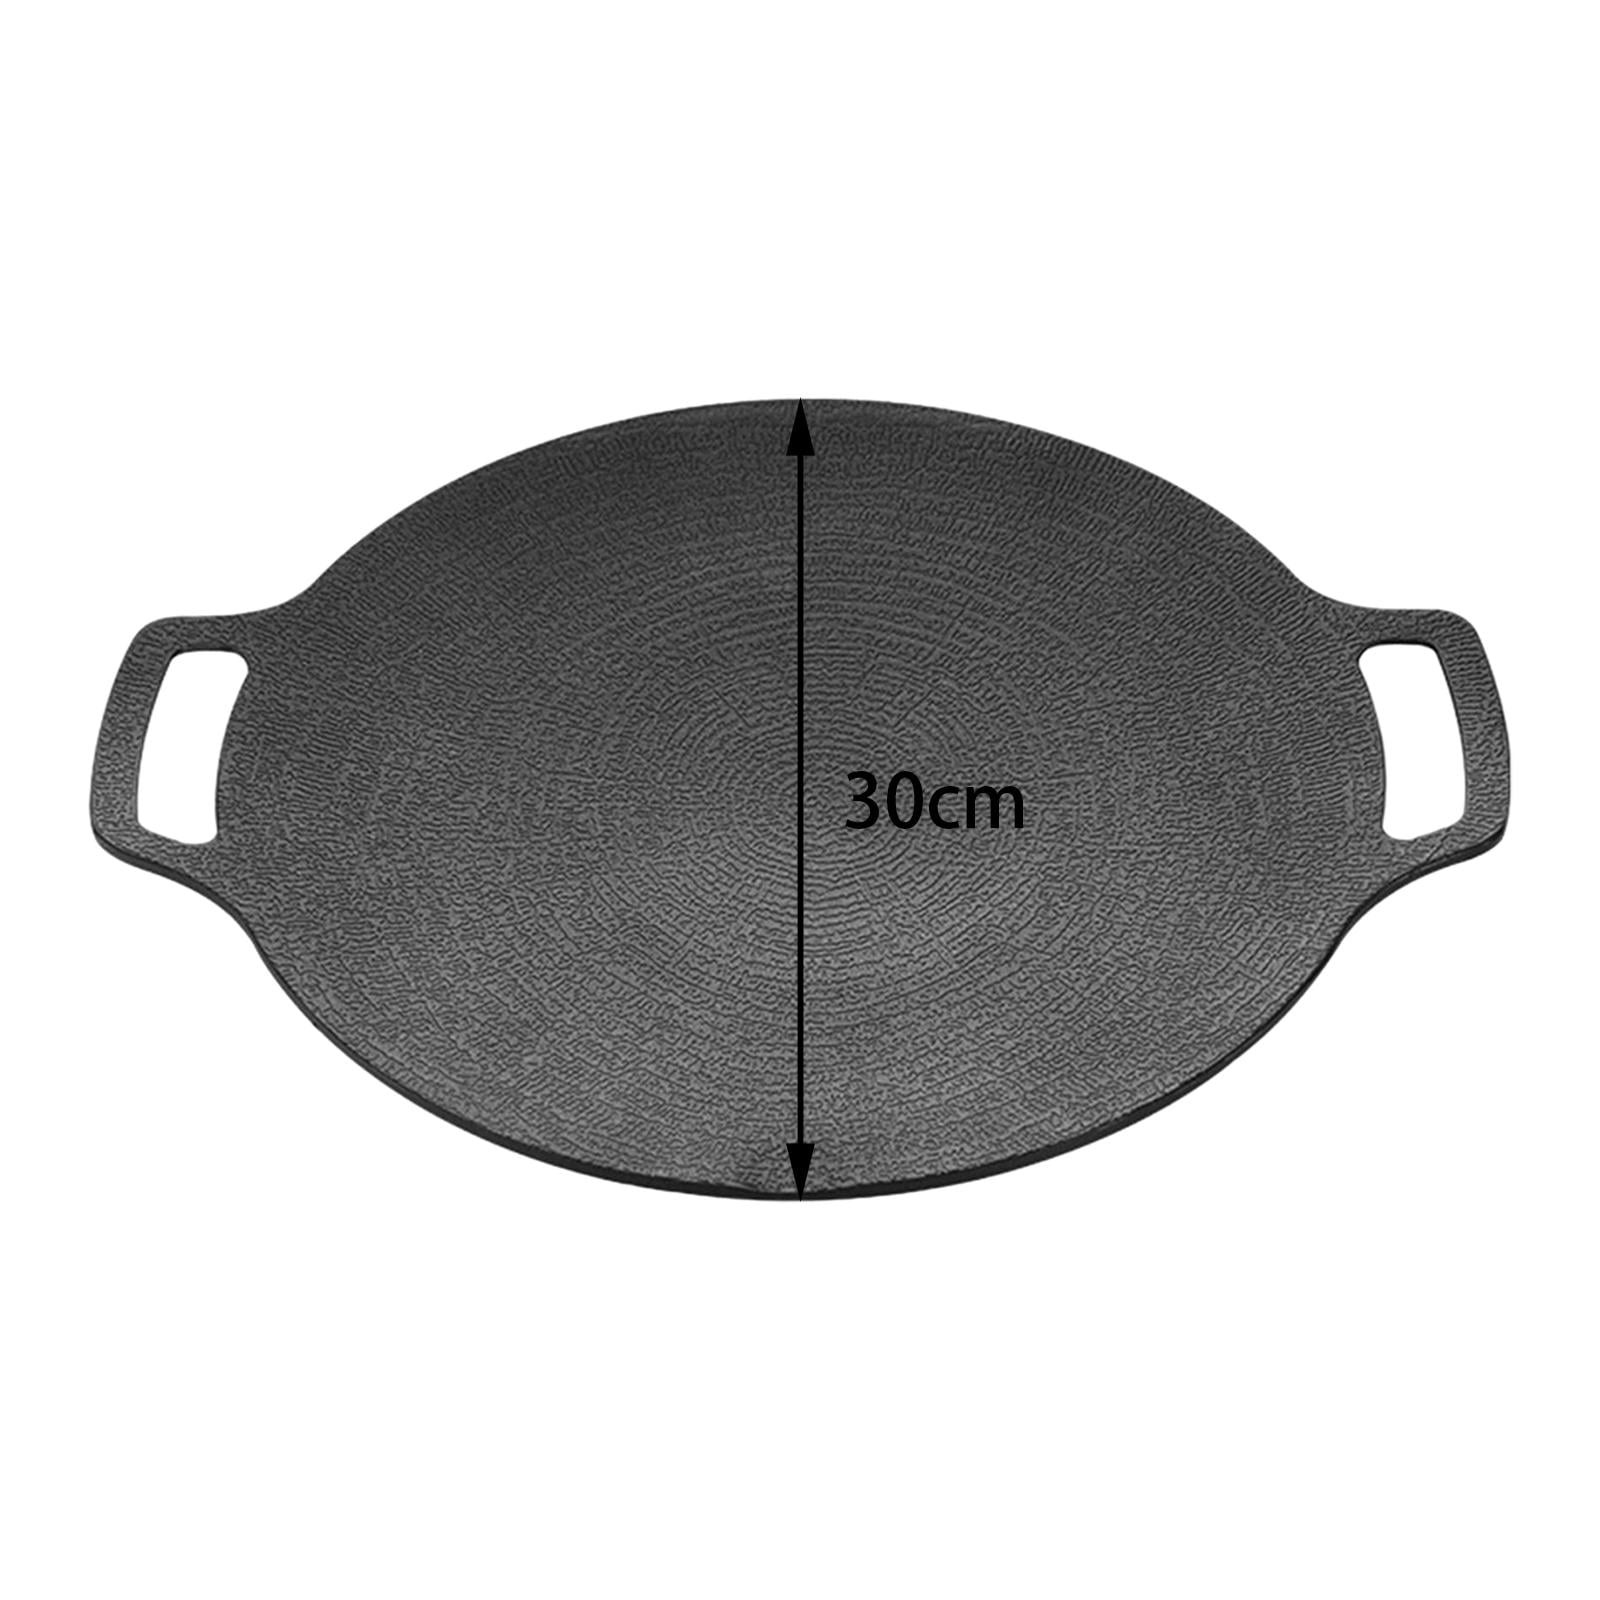 Breakfast Griddle Korean Frying Pan Cost Iron Flat Cooking Pan Frying Pan  Griddle Pan Kitchen Wok for Home Restaurant 28cm Square Frying Pan Wok